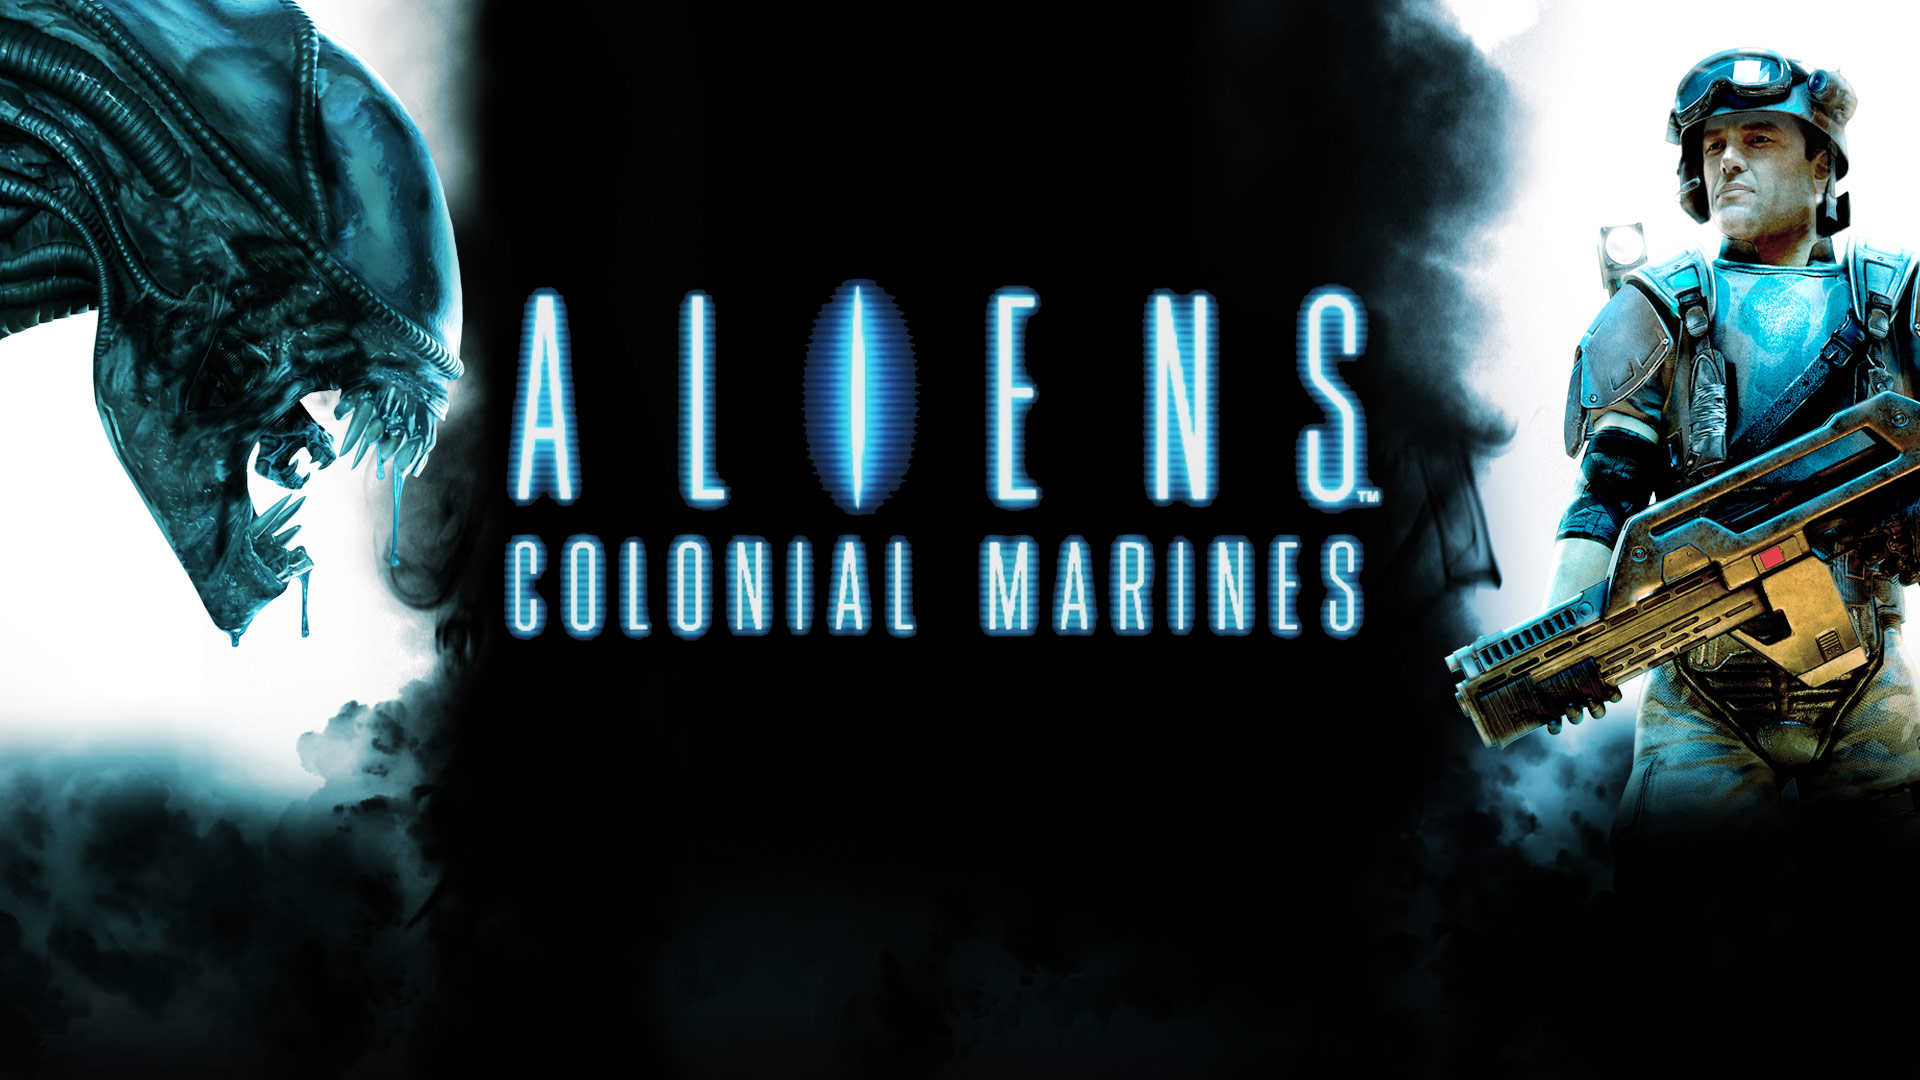 Aliens Colonial Marines Wallpaper YuiPhone Alien And Marine Logo